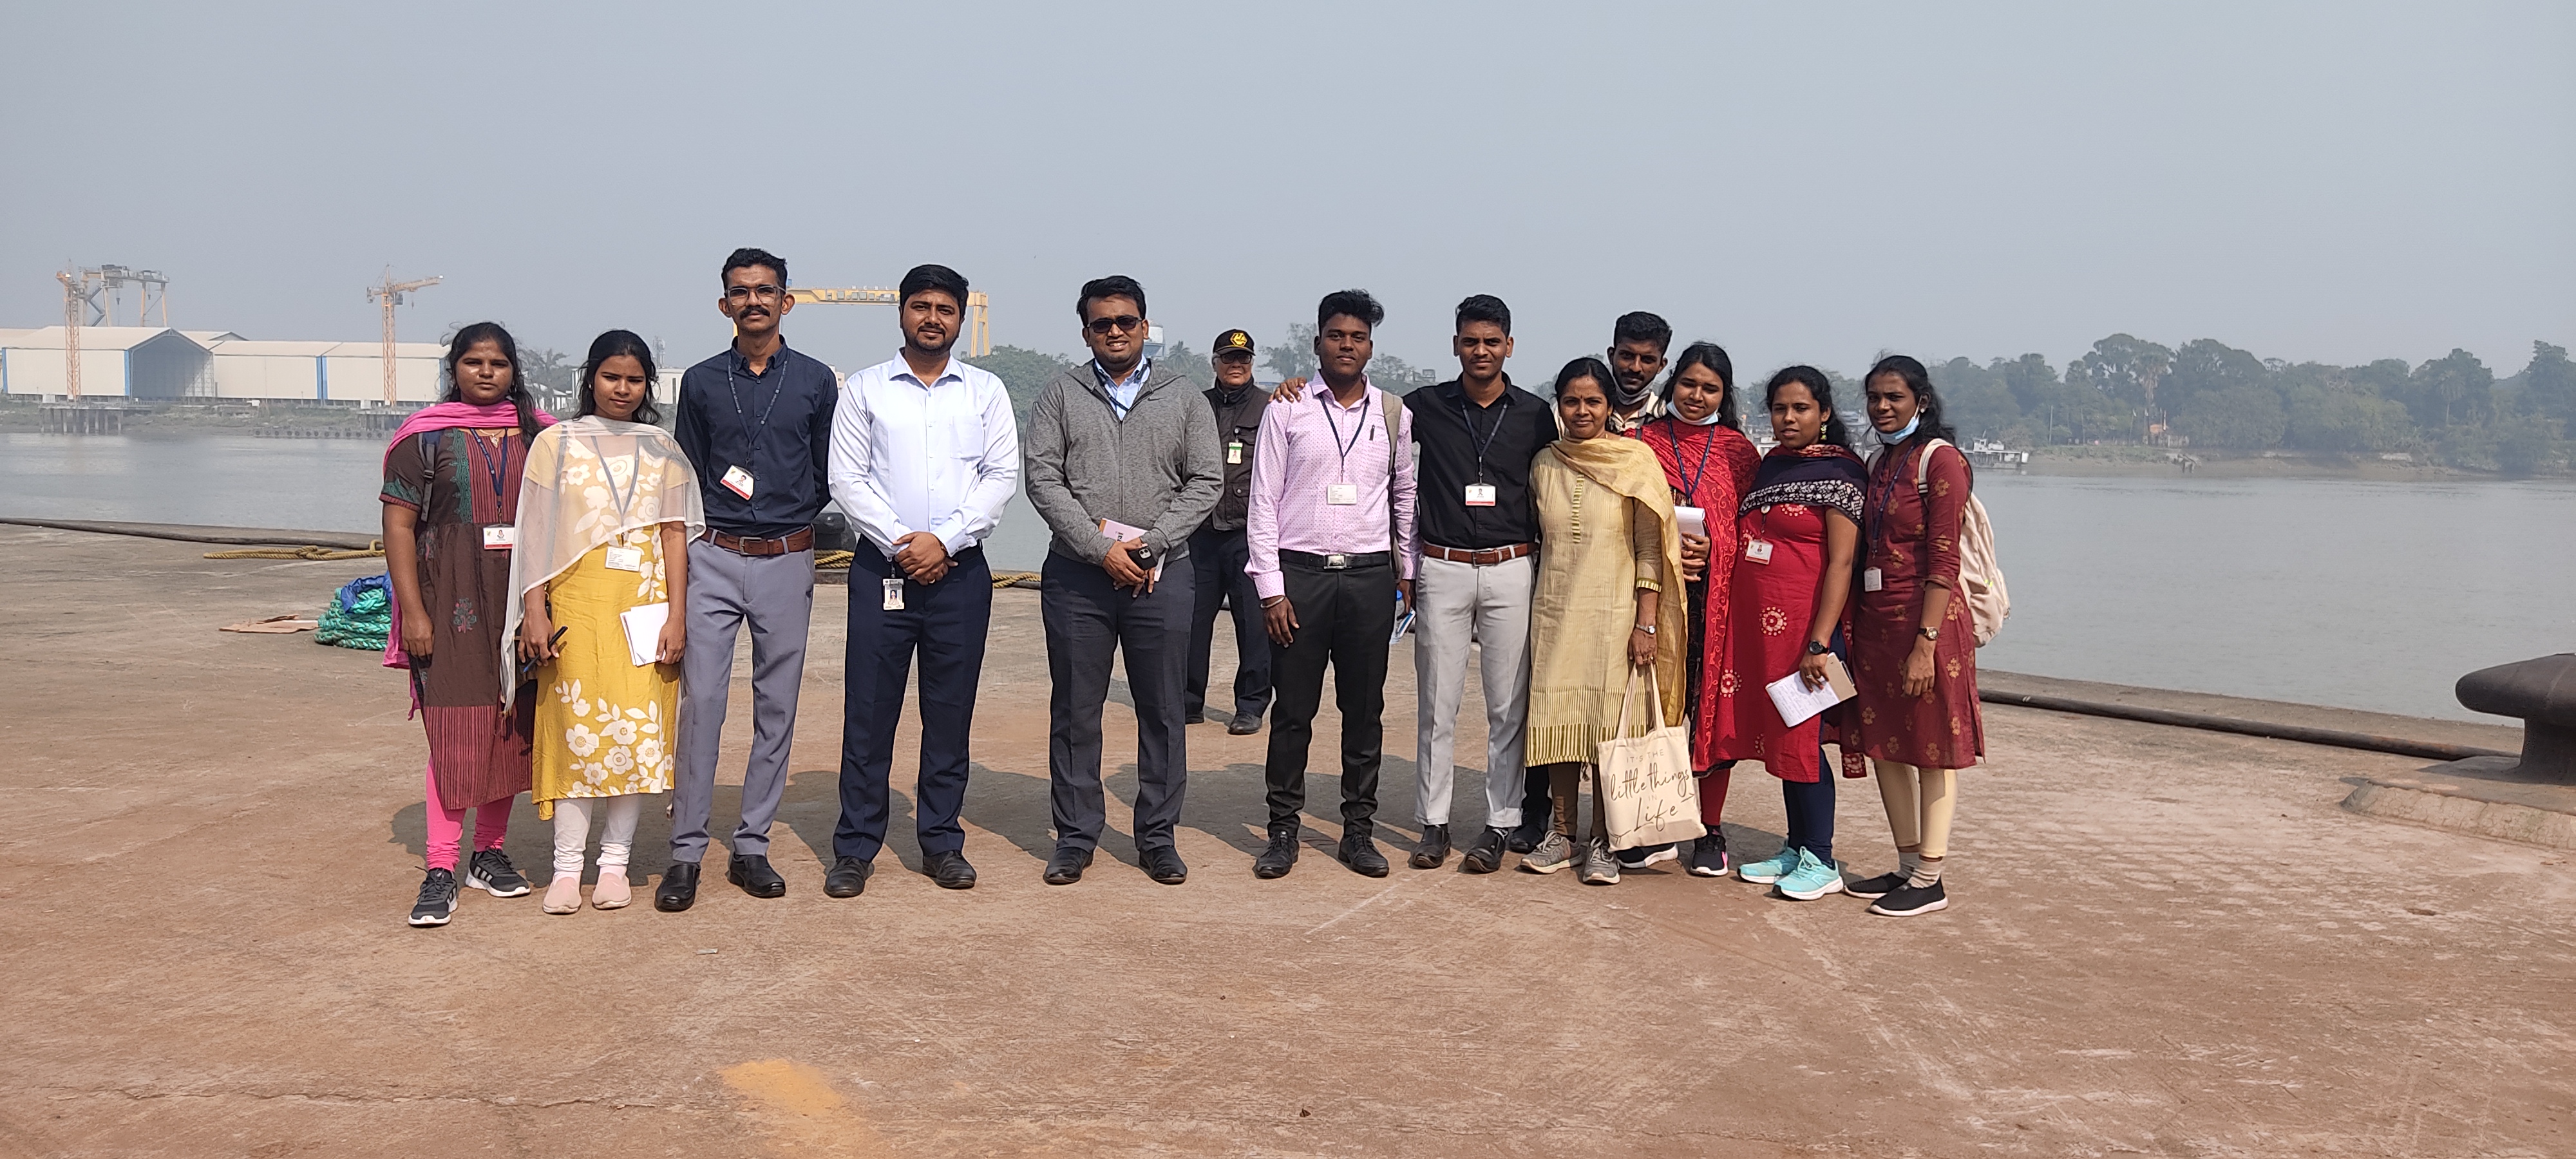 Visit of students from Social Work Department, Loyola College, Chennai 14 Dec 22